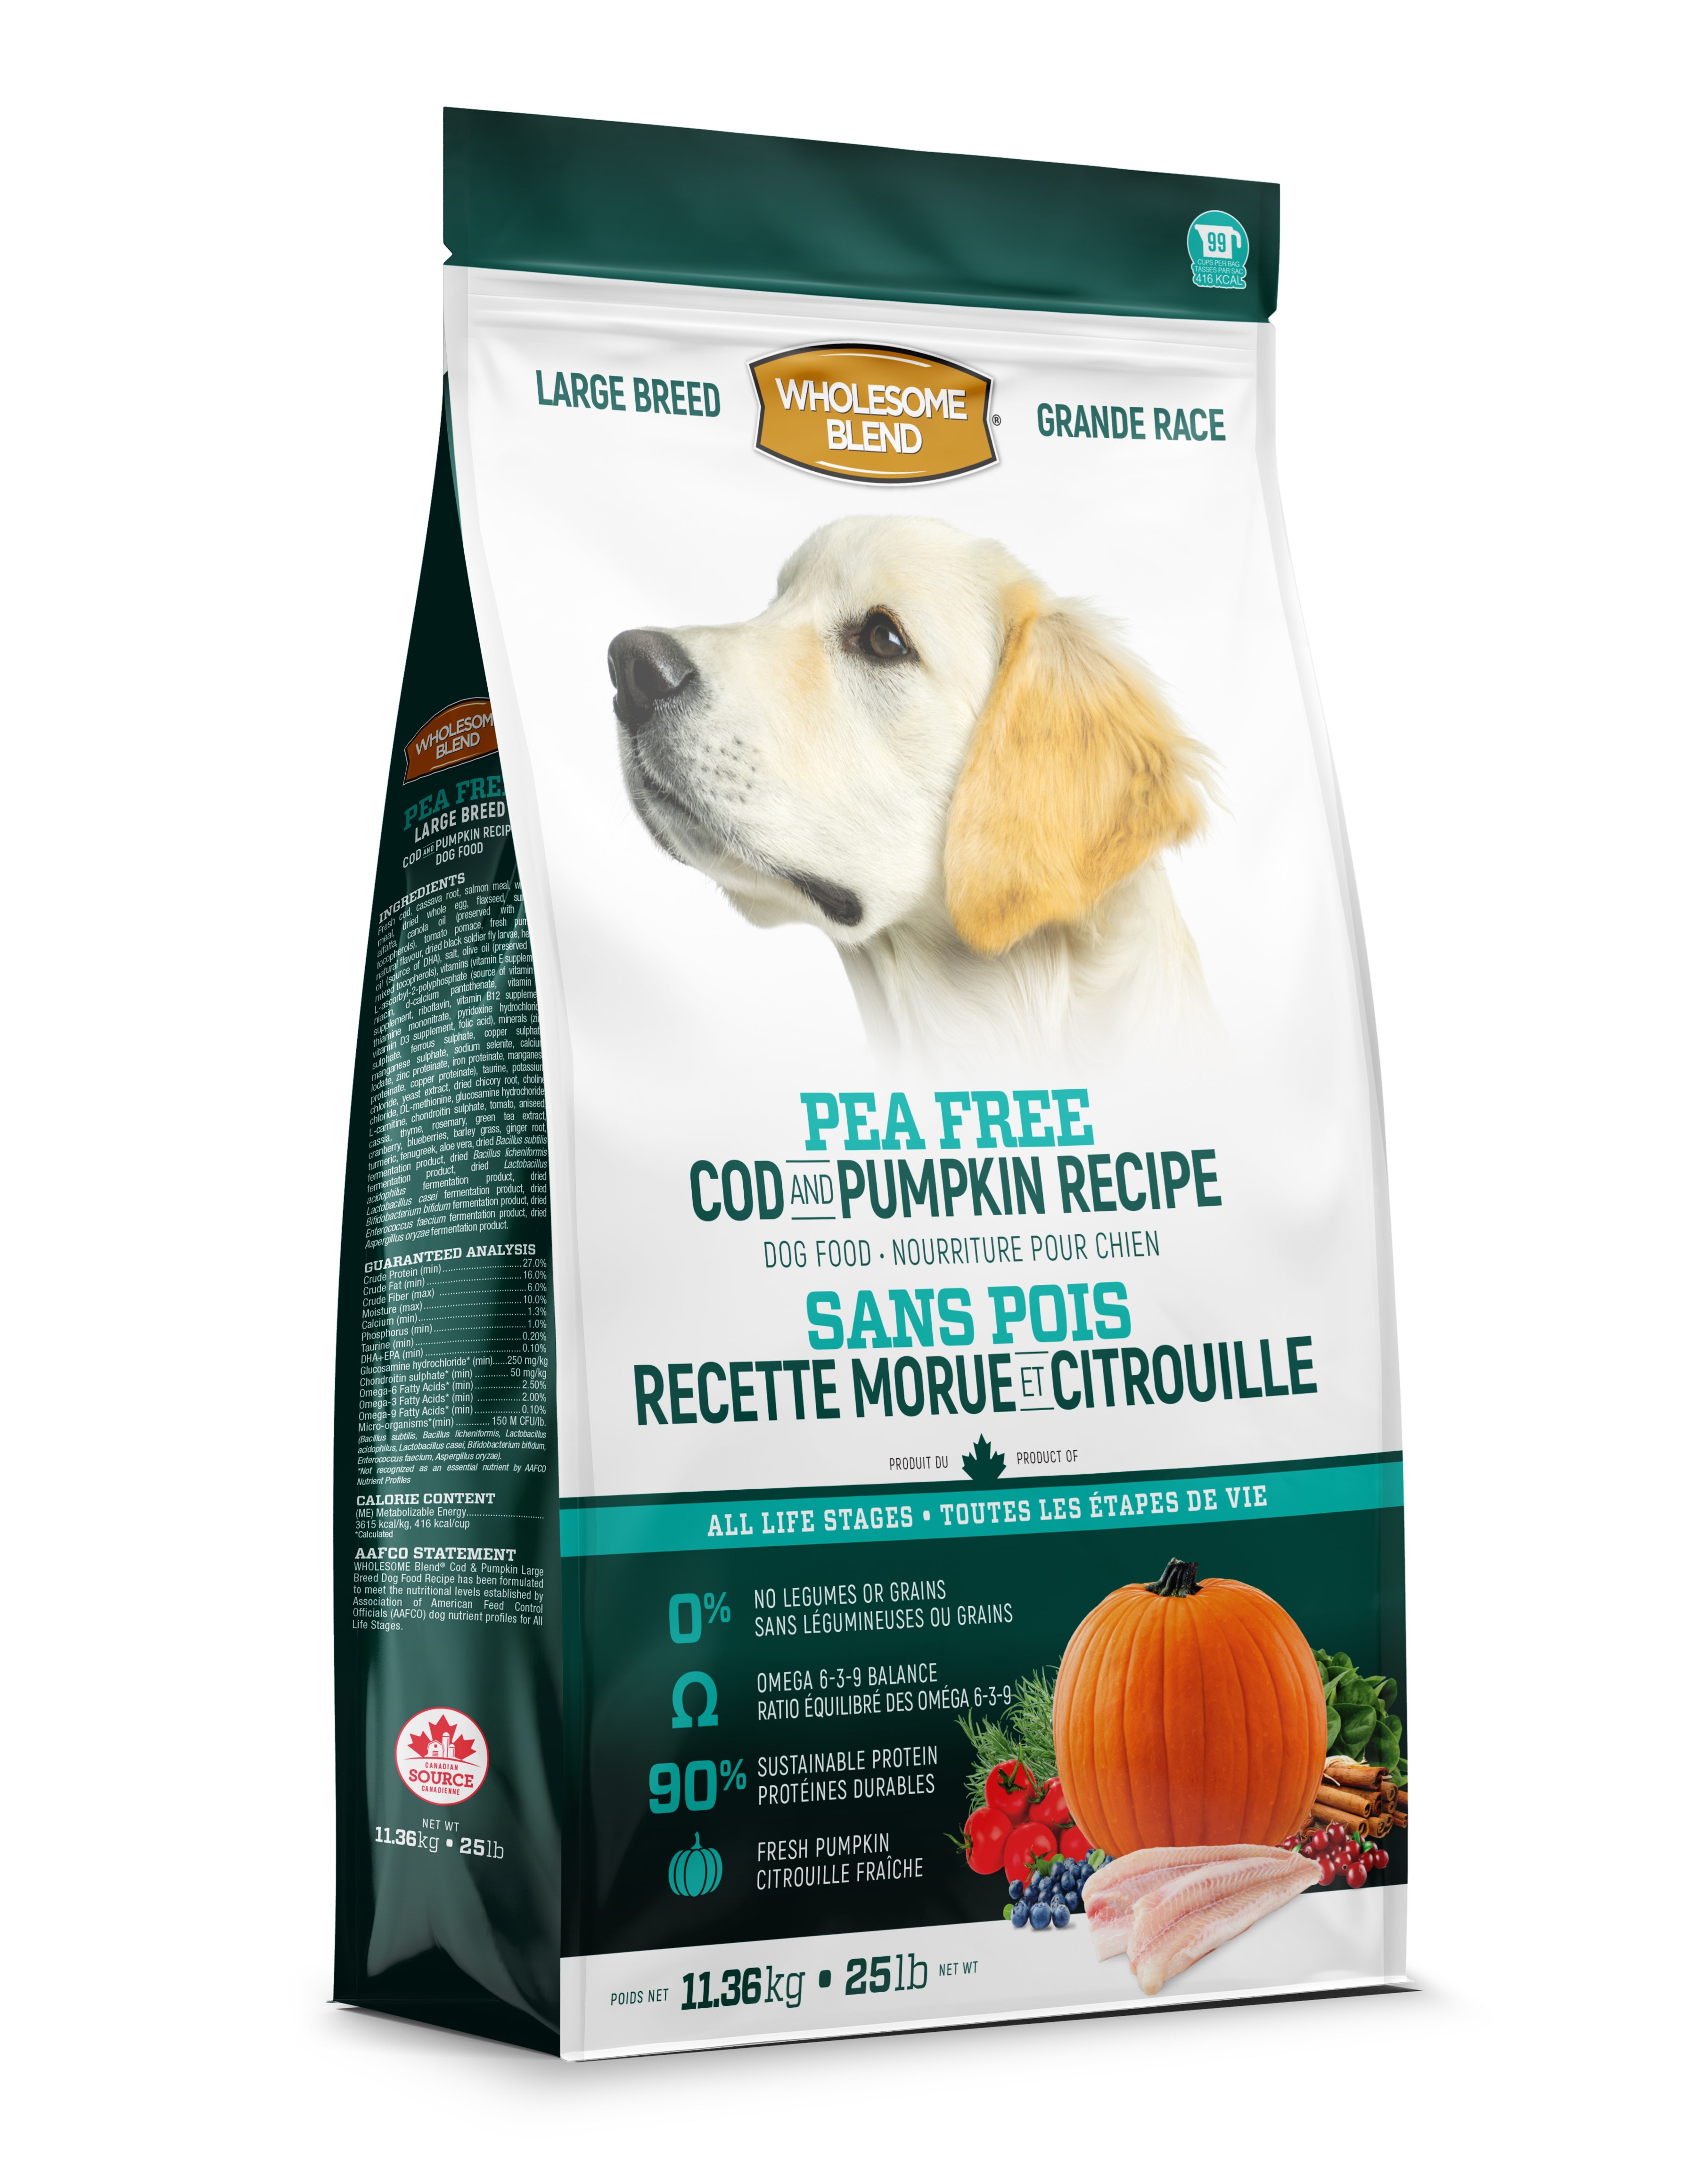 Wholesome Blend Pea-Free Large Breed 